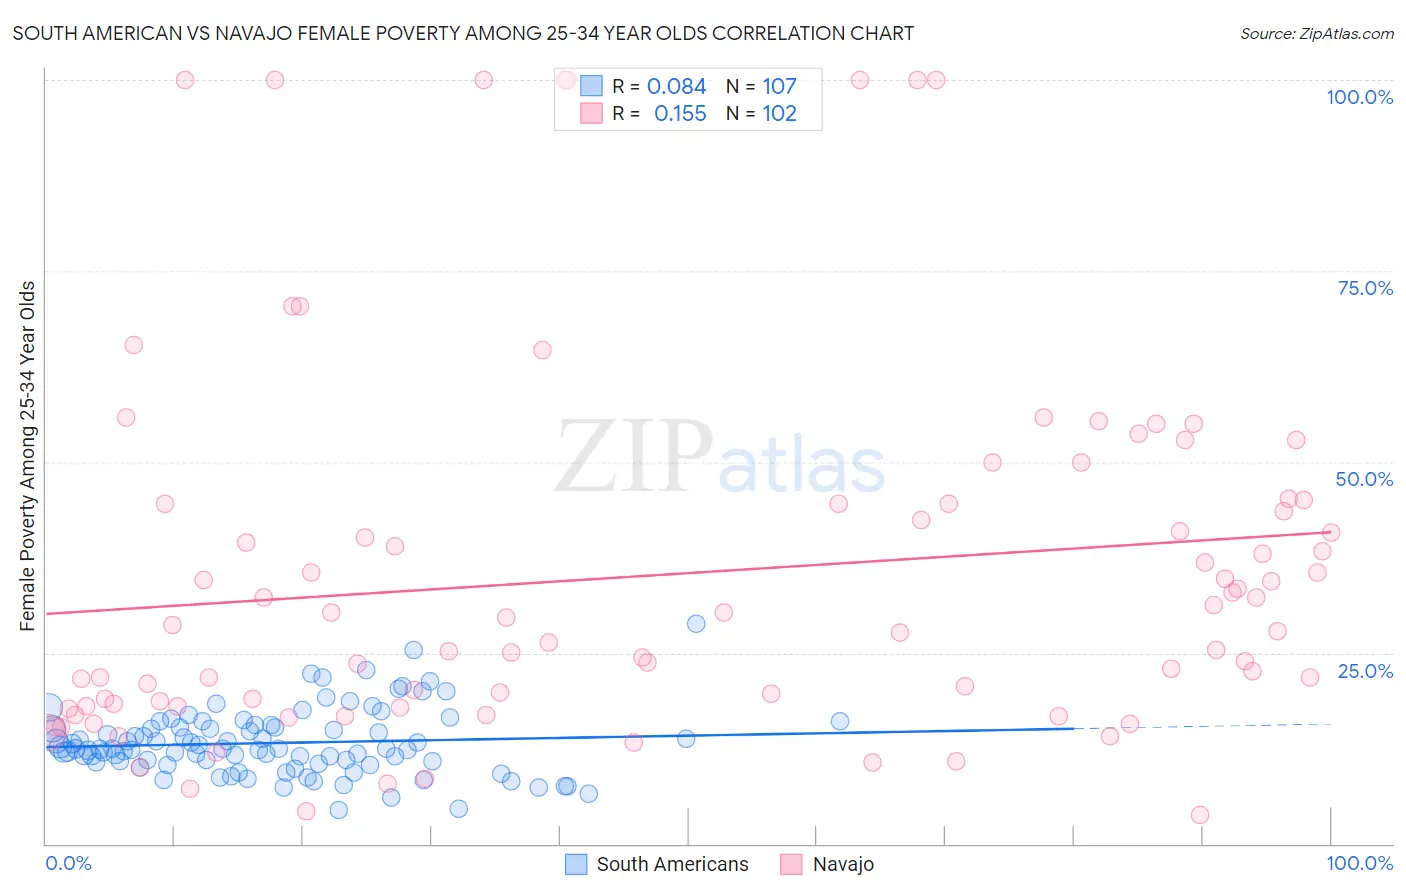 South American vs Navajo Female Poverty Among 25-34 Year Olds